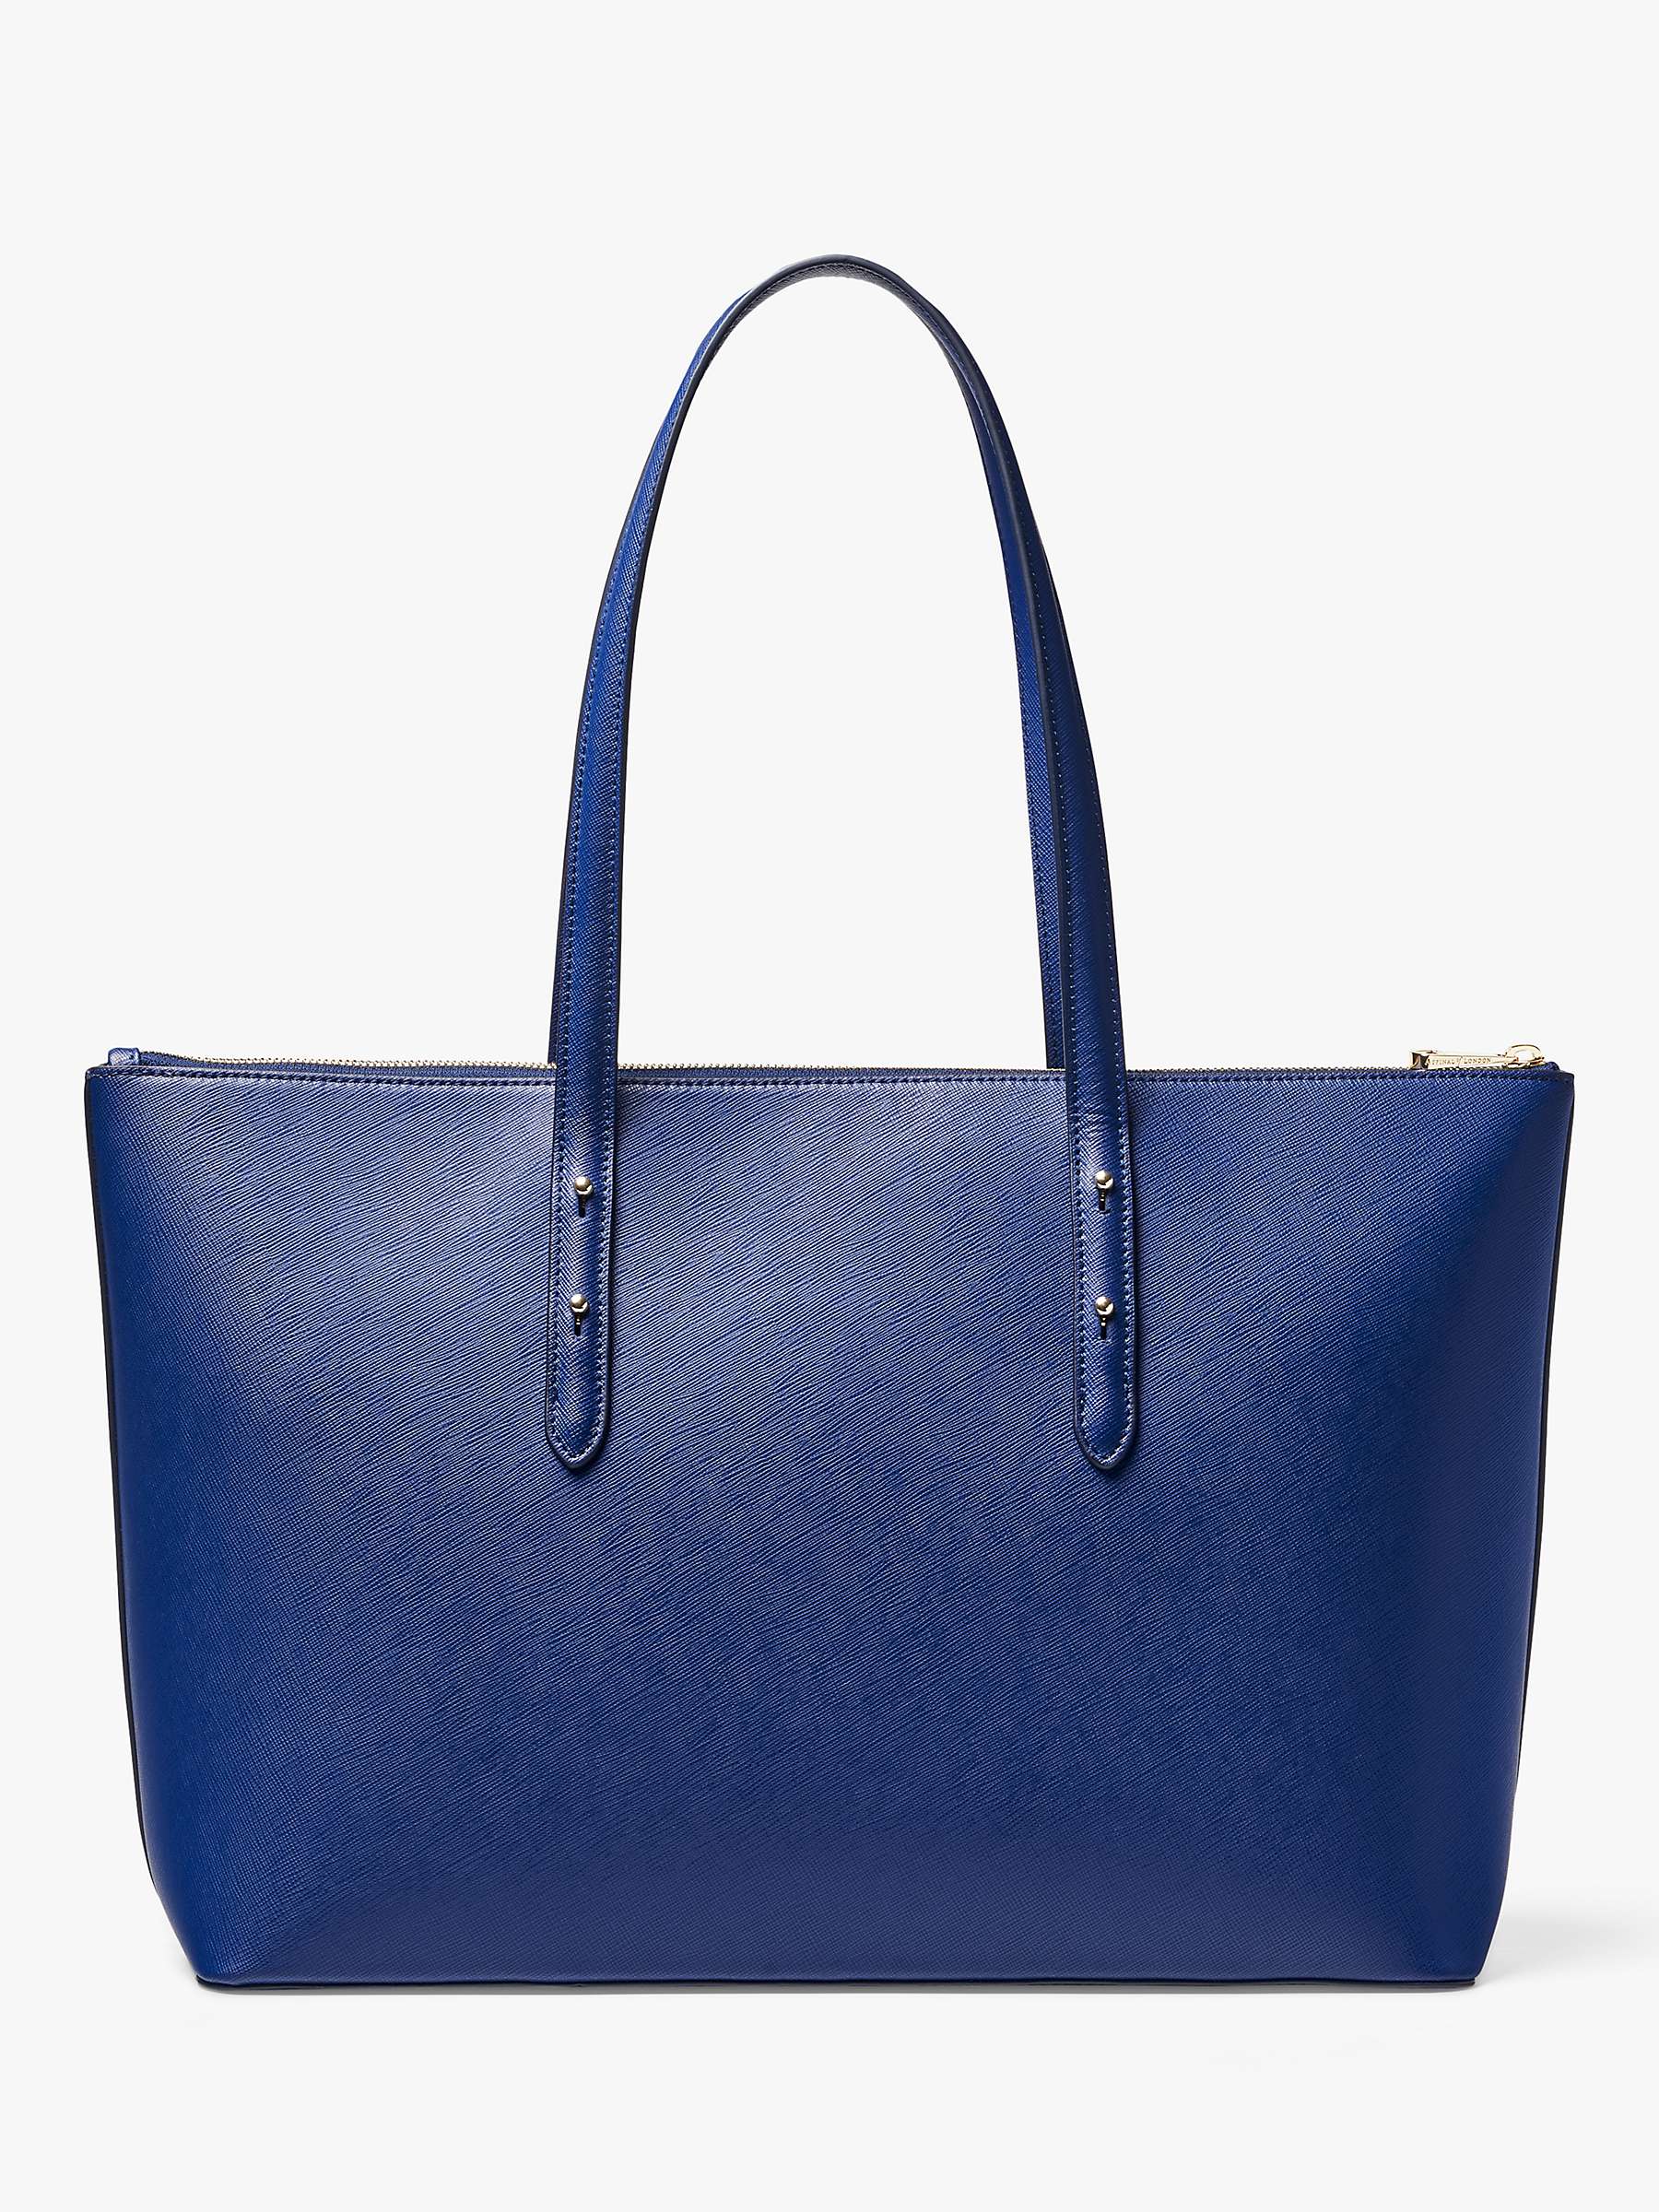 Buy Aspinal of London Regent Saffiano Leather Zip-Top Tote Bag Online at johnlewis.com